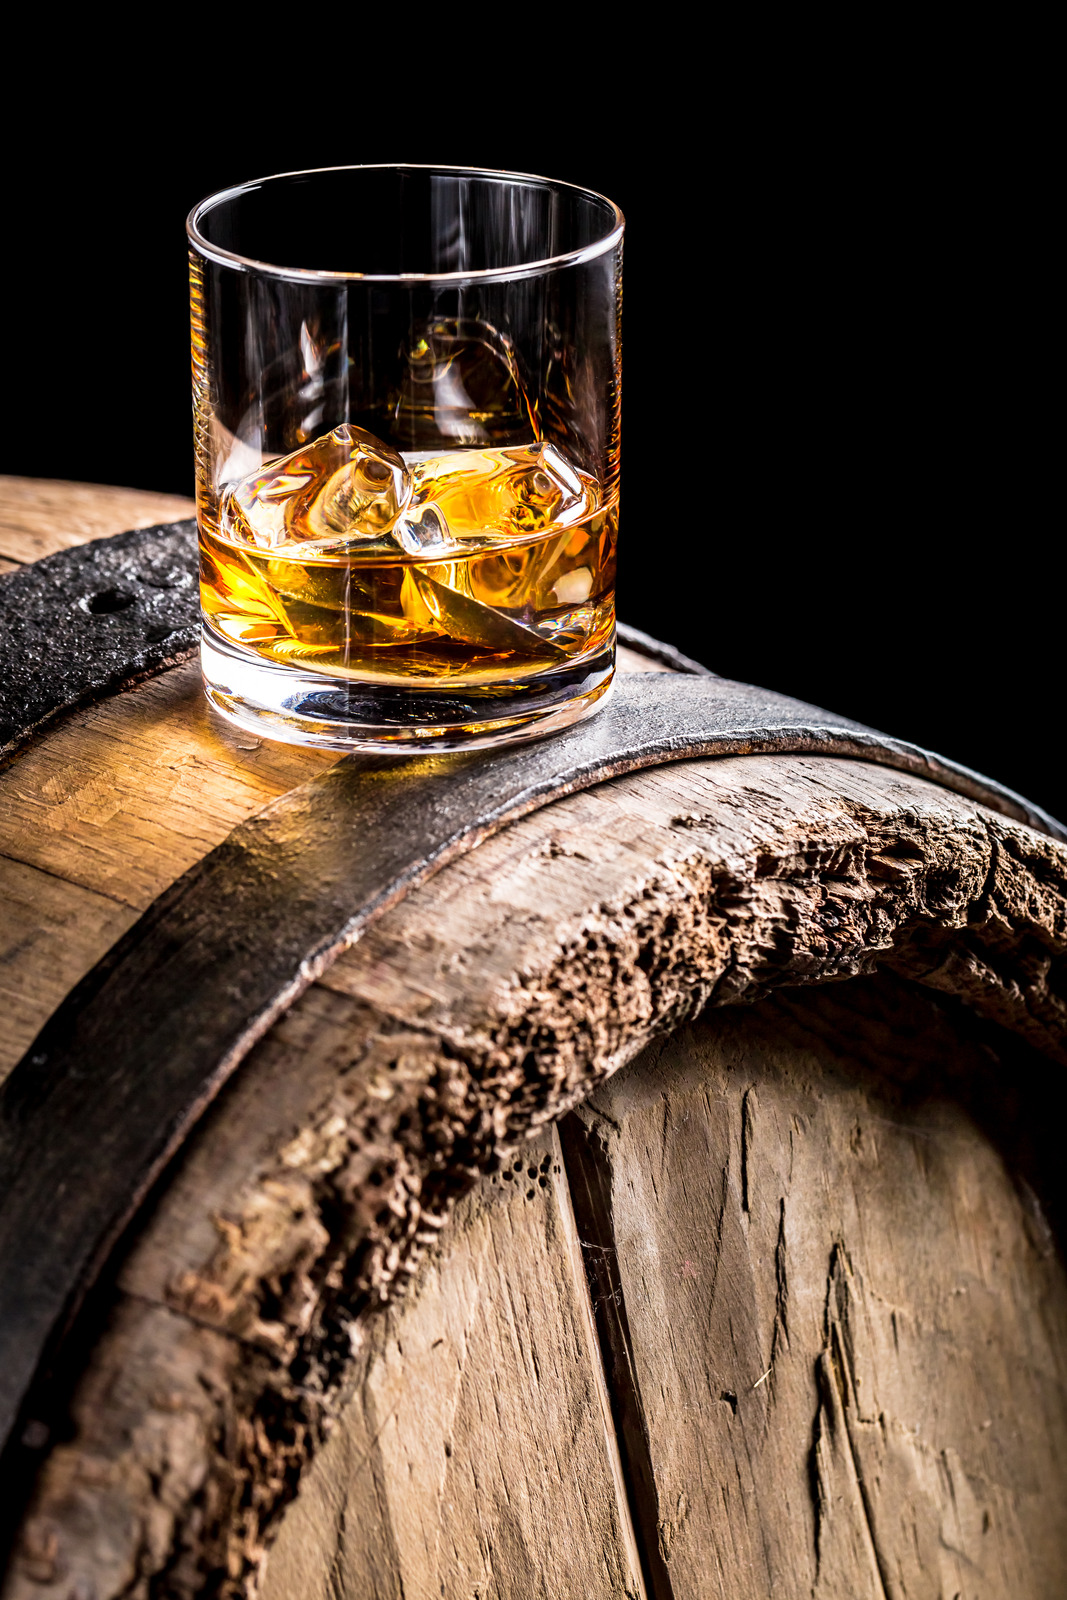 Whiskey glass and old wooden barrel.